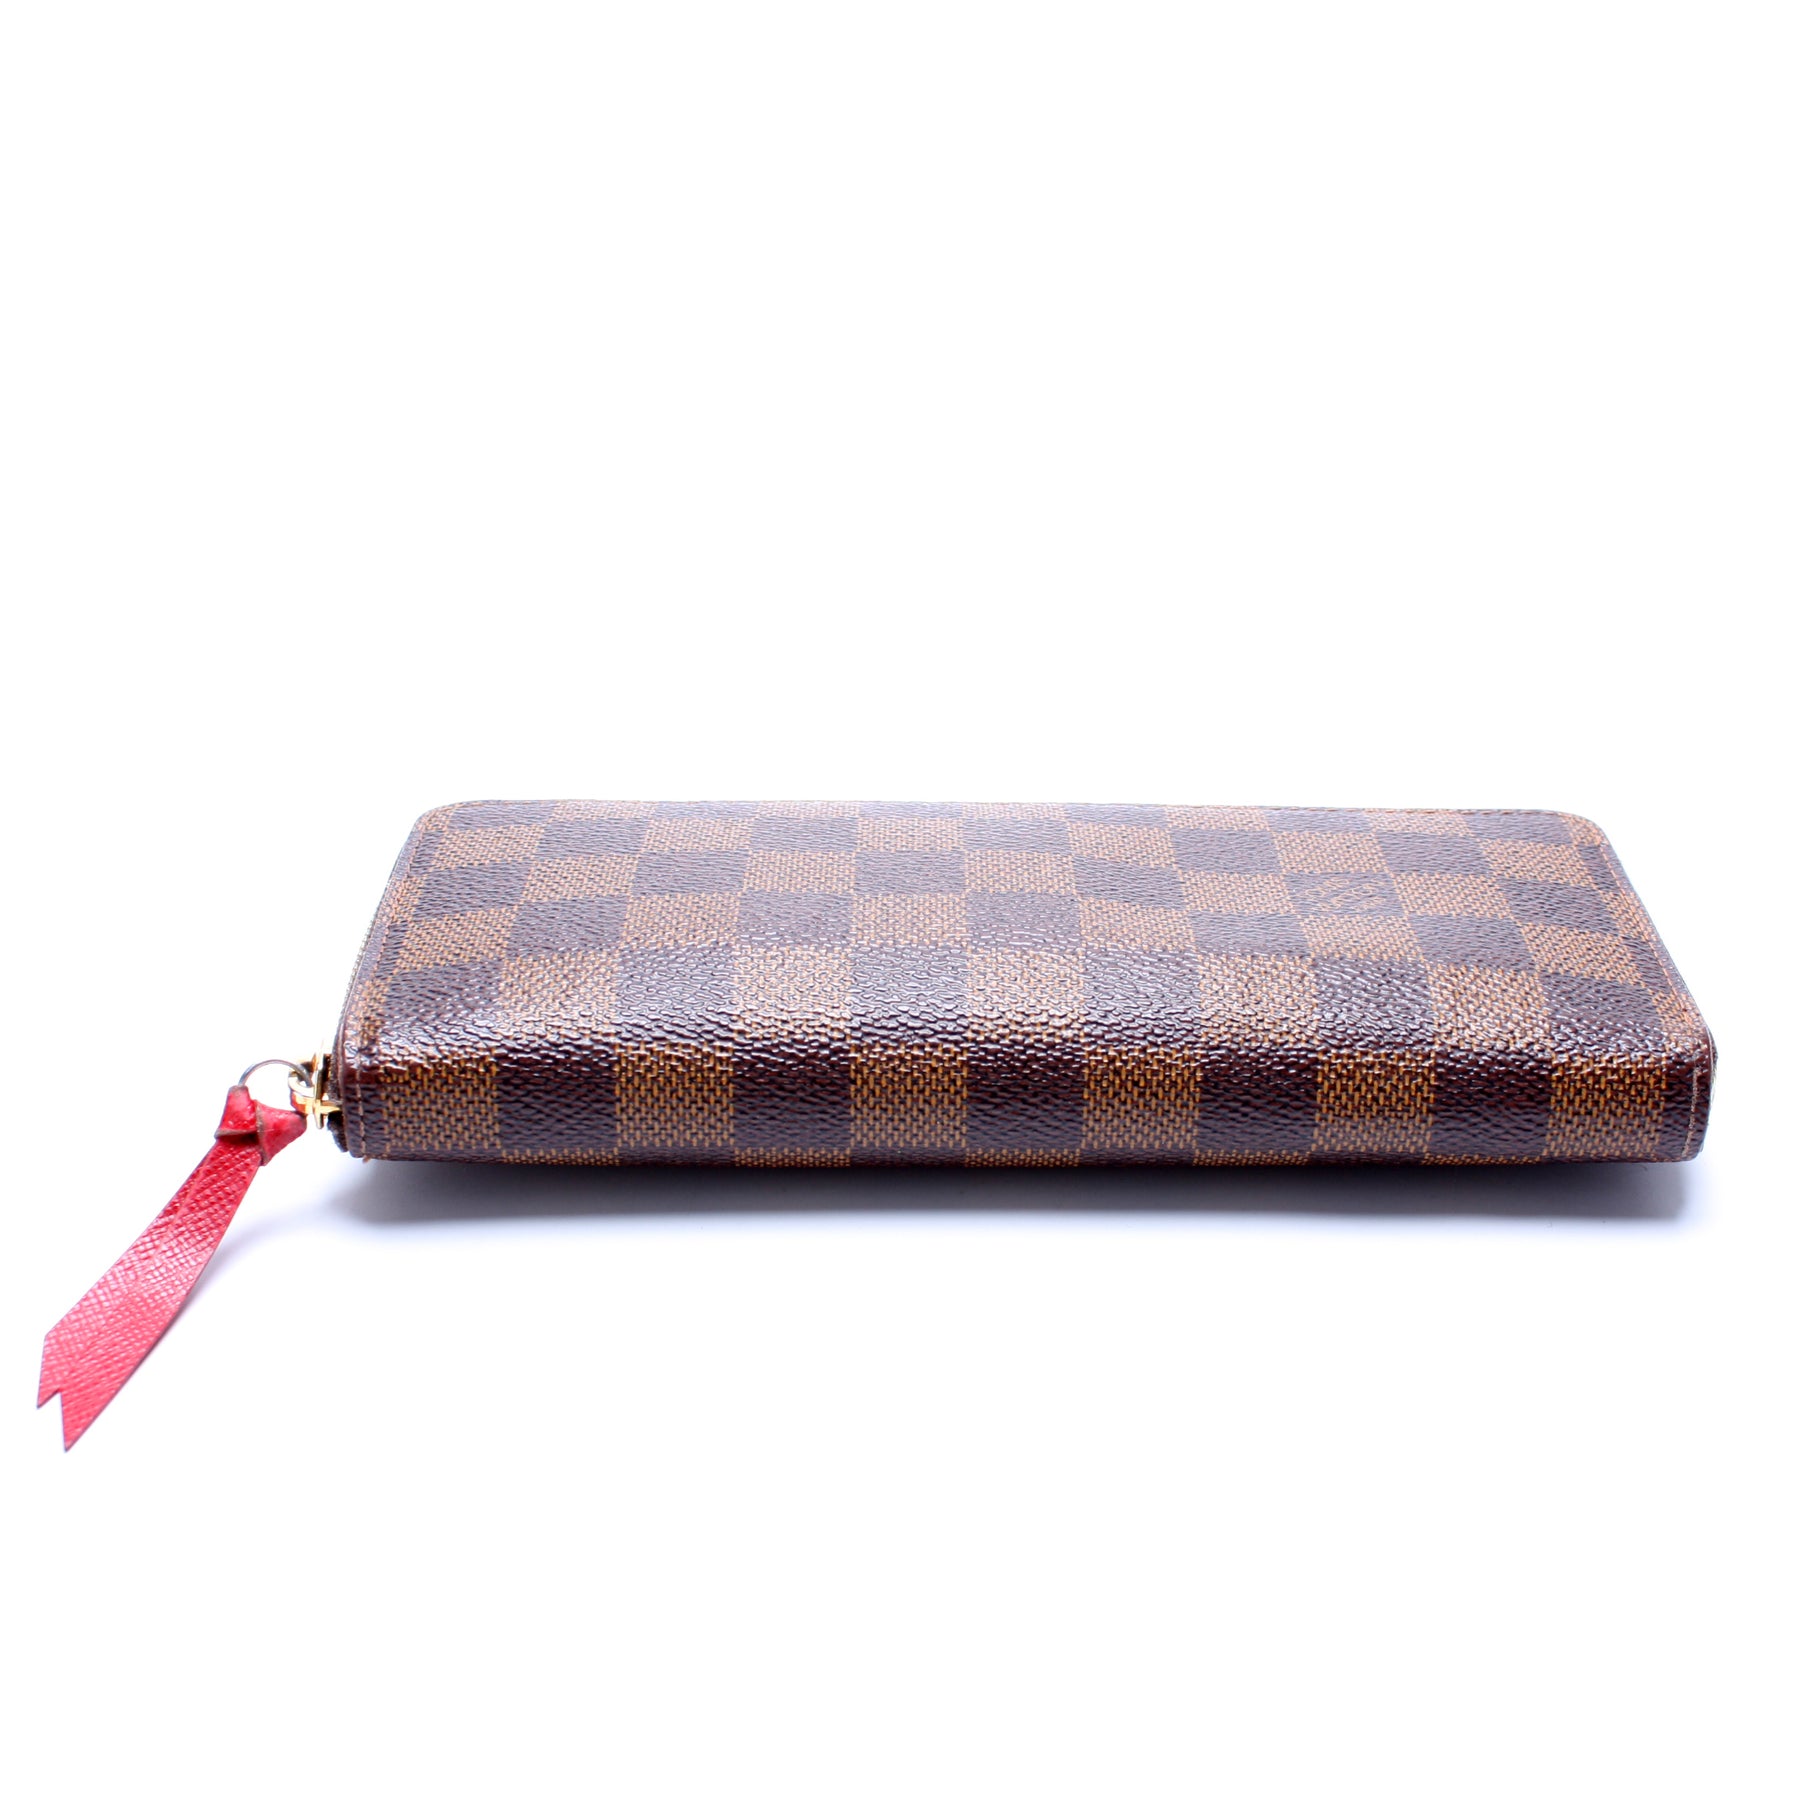 Louis Vuitton - Clemence Wallet - Damier Ebene - GHW - Immaculate